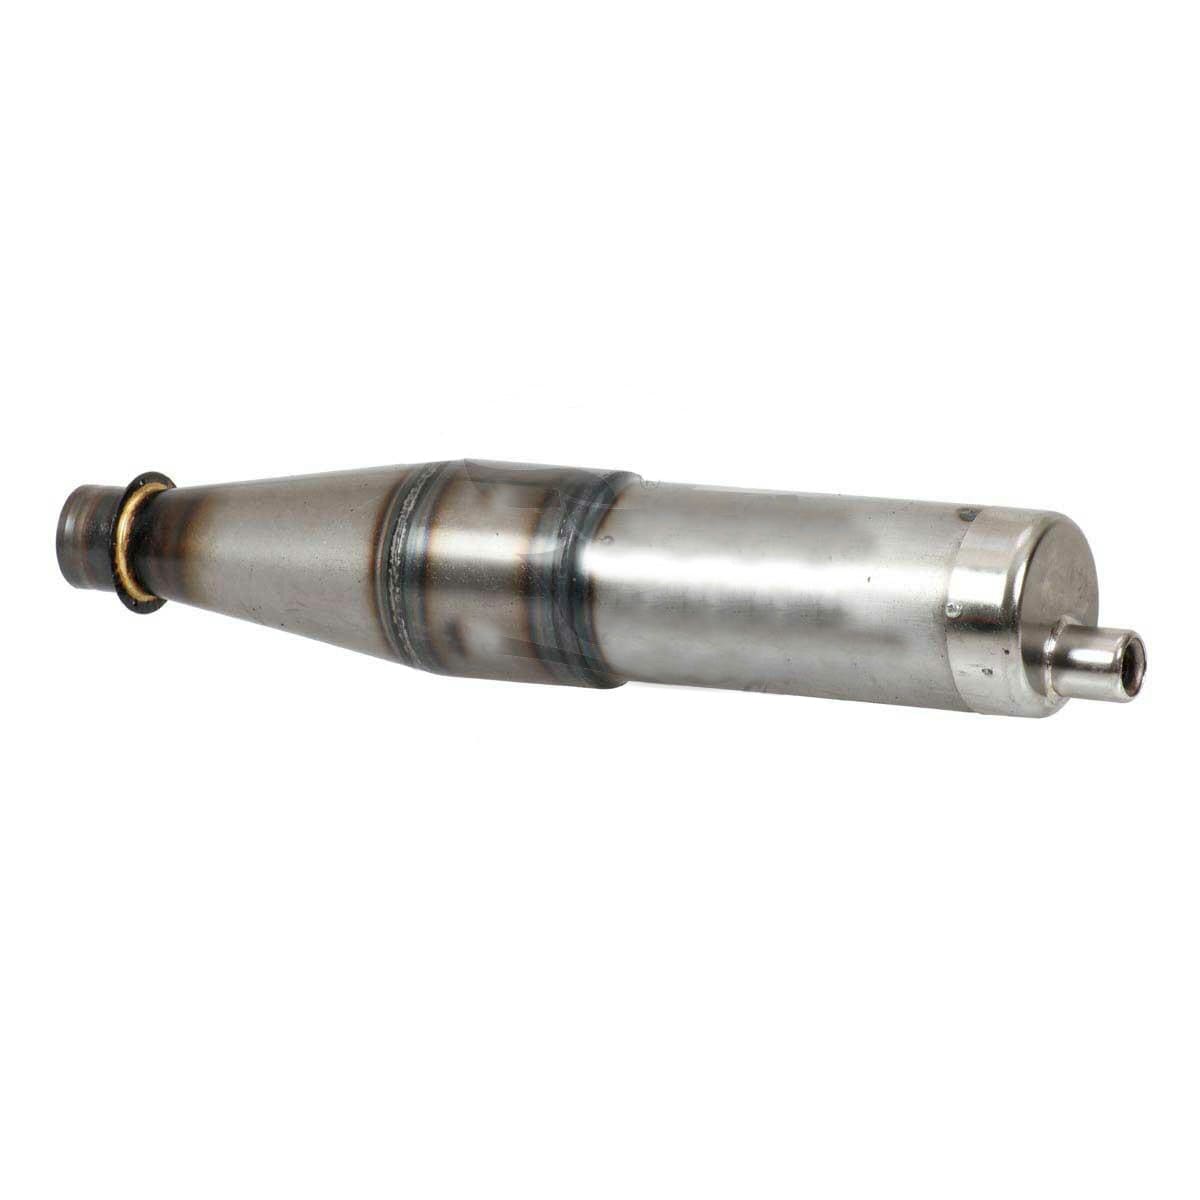 Muffler Exhaust for 100cc Engines, 110/100 47,5 Cone, 0,6 mm